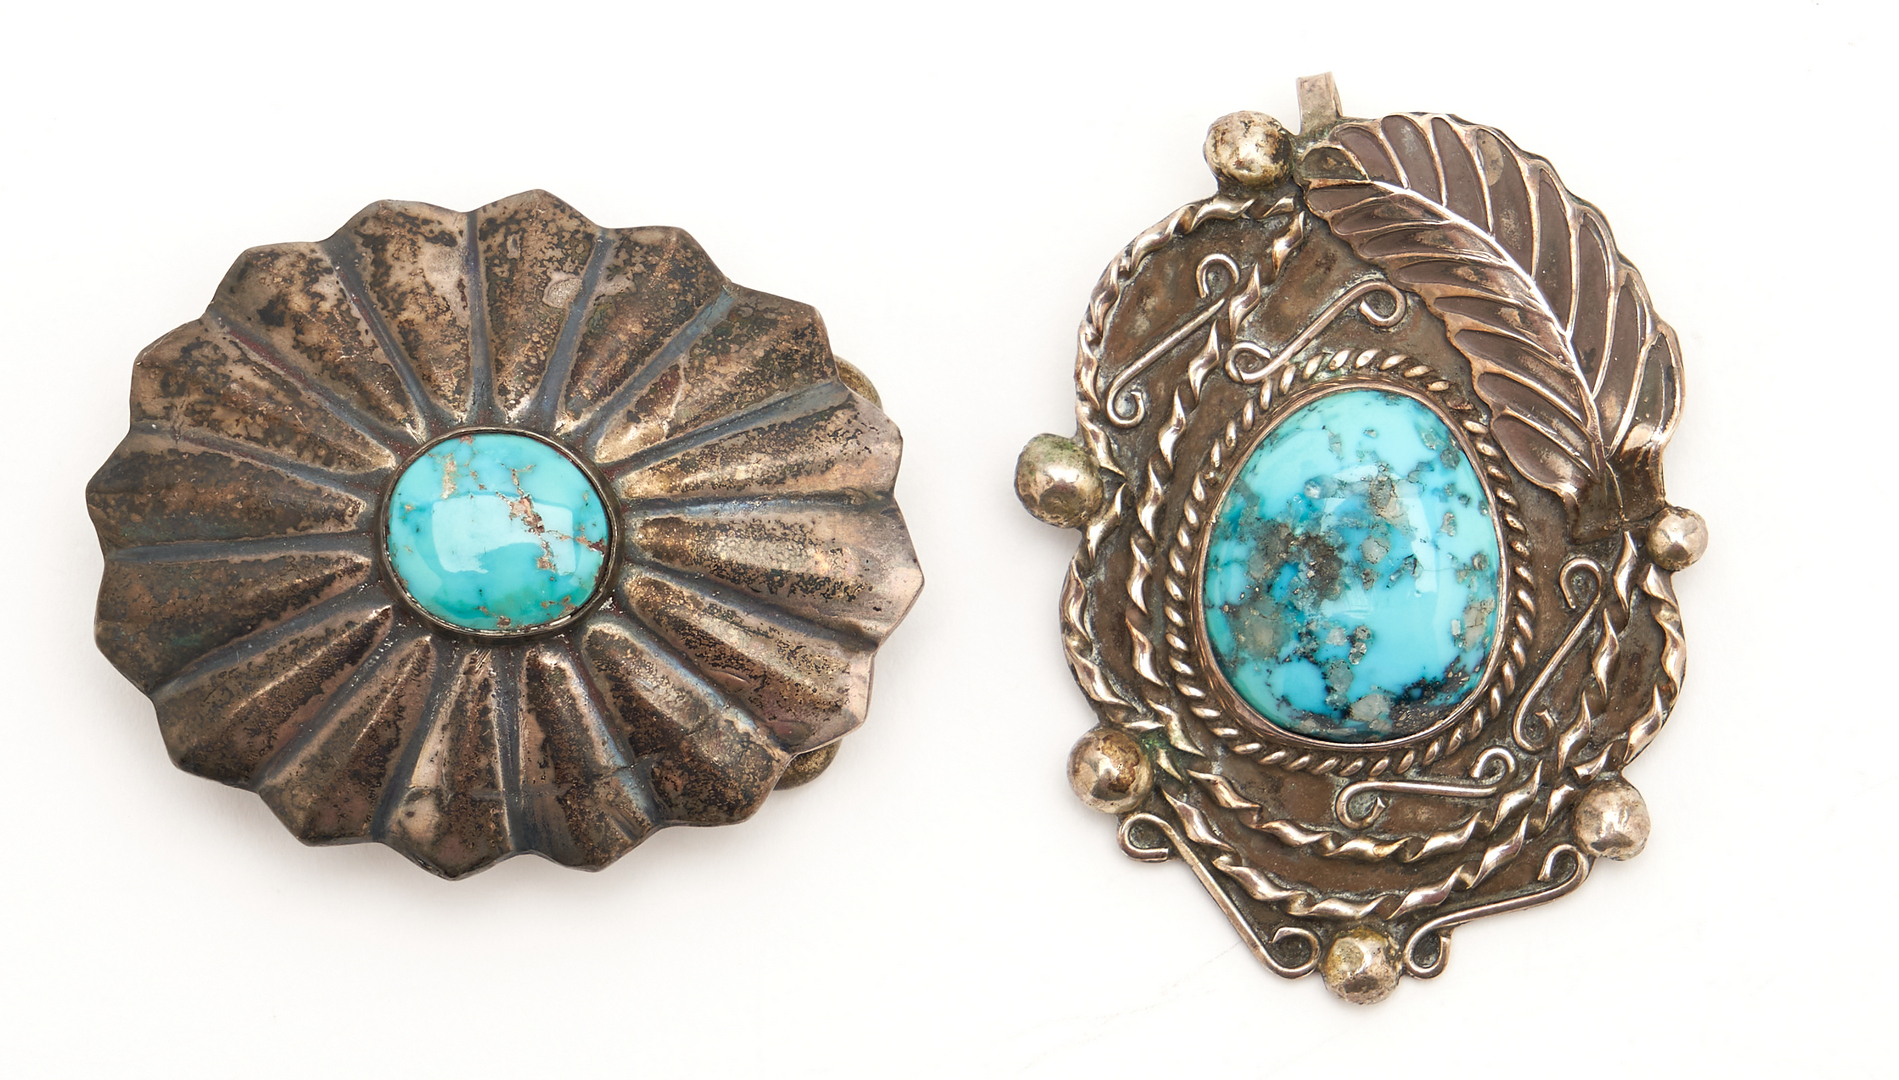 Lot 1096: 9 Native American Silver, Turquoise & Clay Jewelry Items